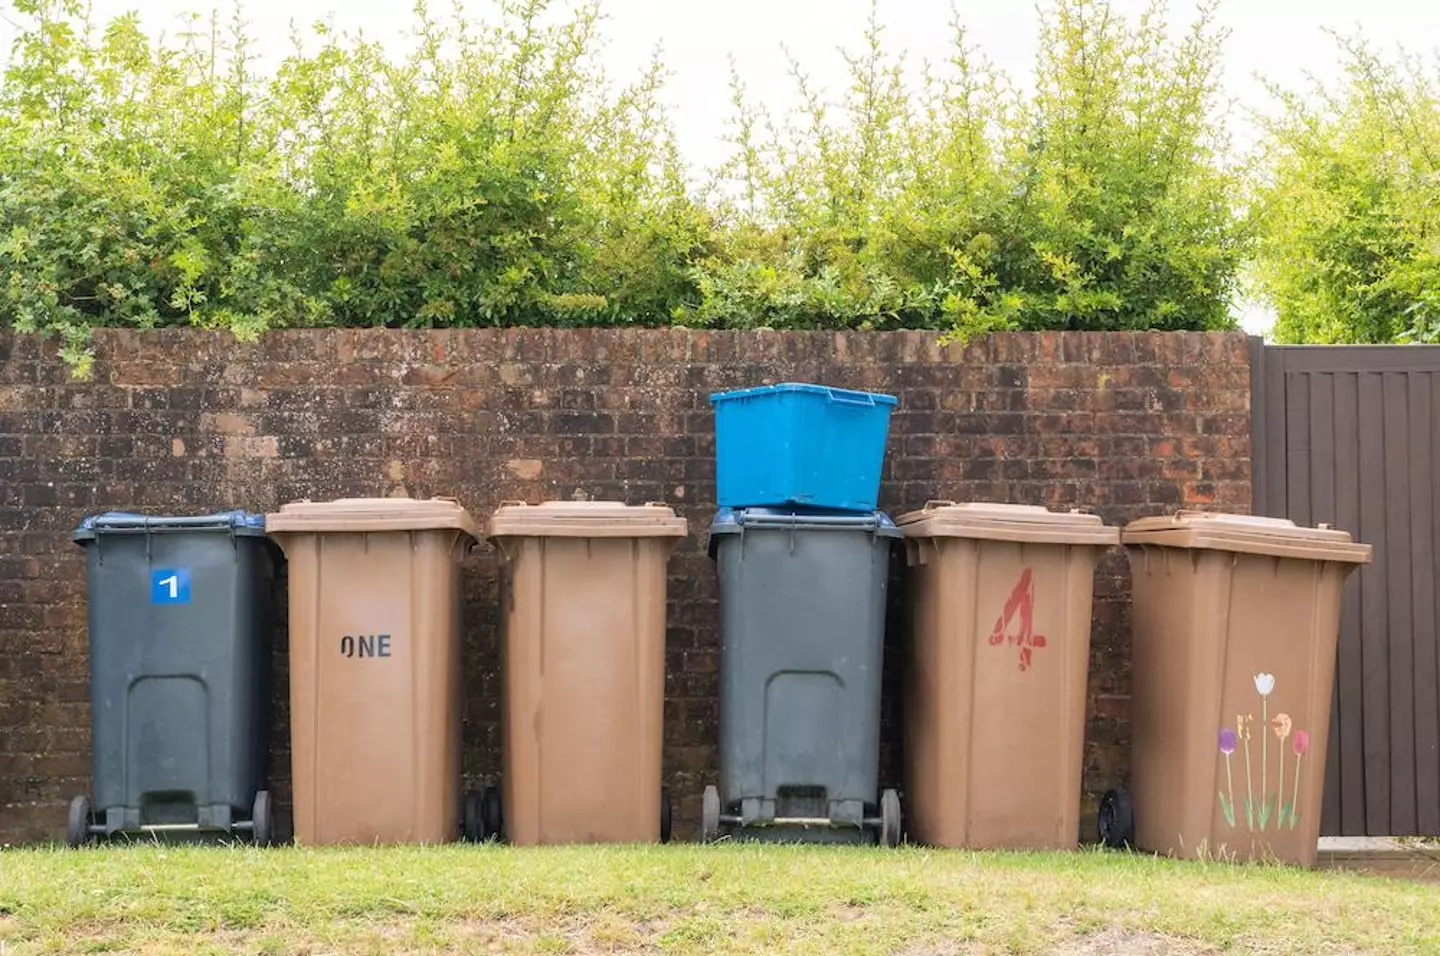 Seven bins per household could be a reality.